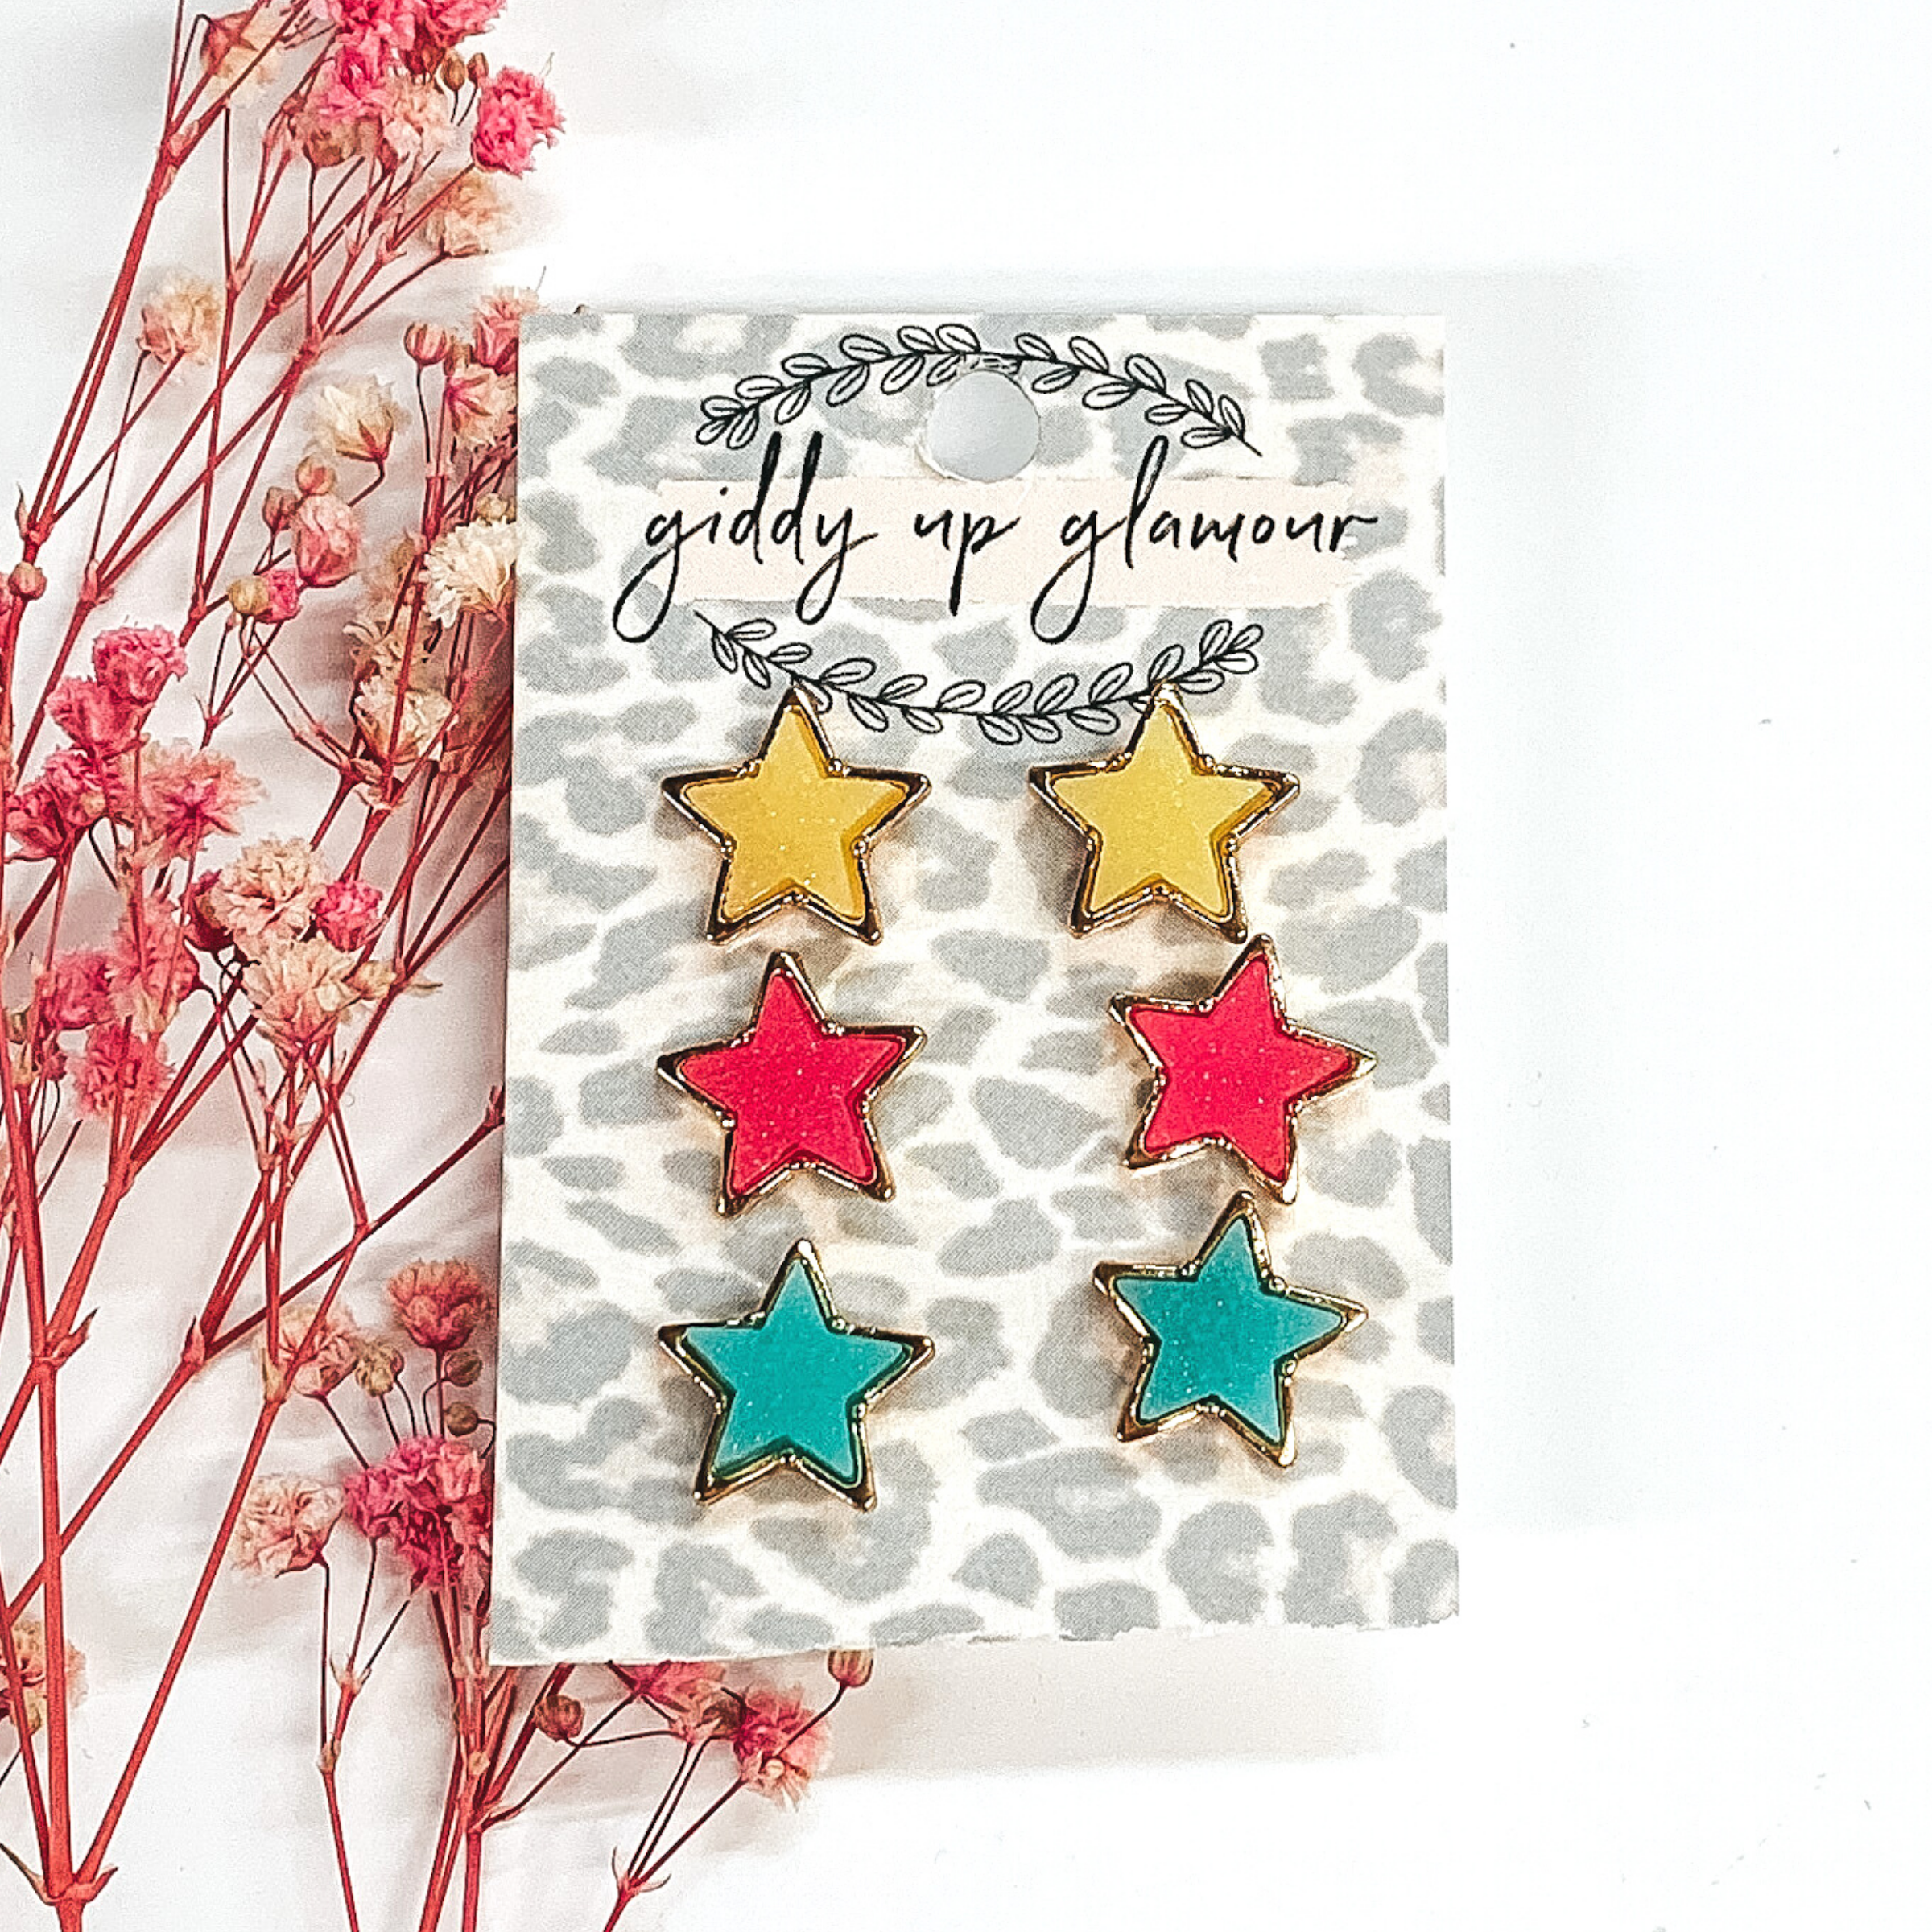 This earring set has gold star studs with a druzy inlay. It comes in the colors yellow, pink, and teal. This earring set is pictured on a white background and pink baby breaths. 